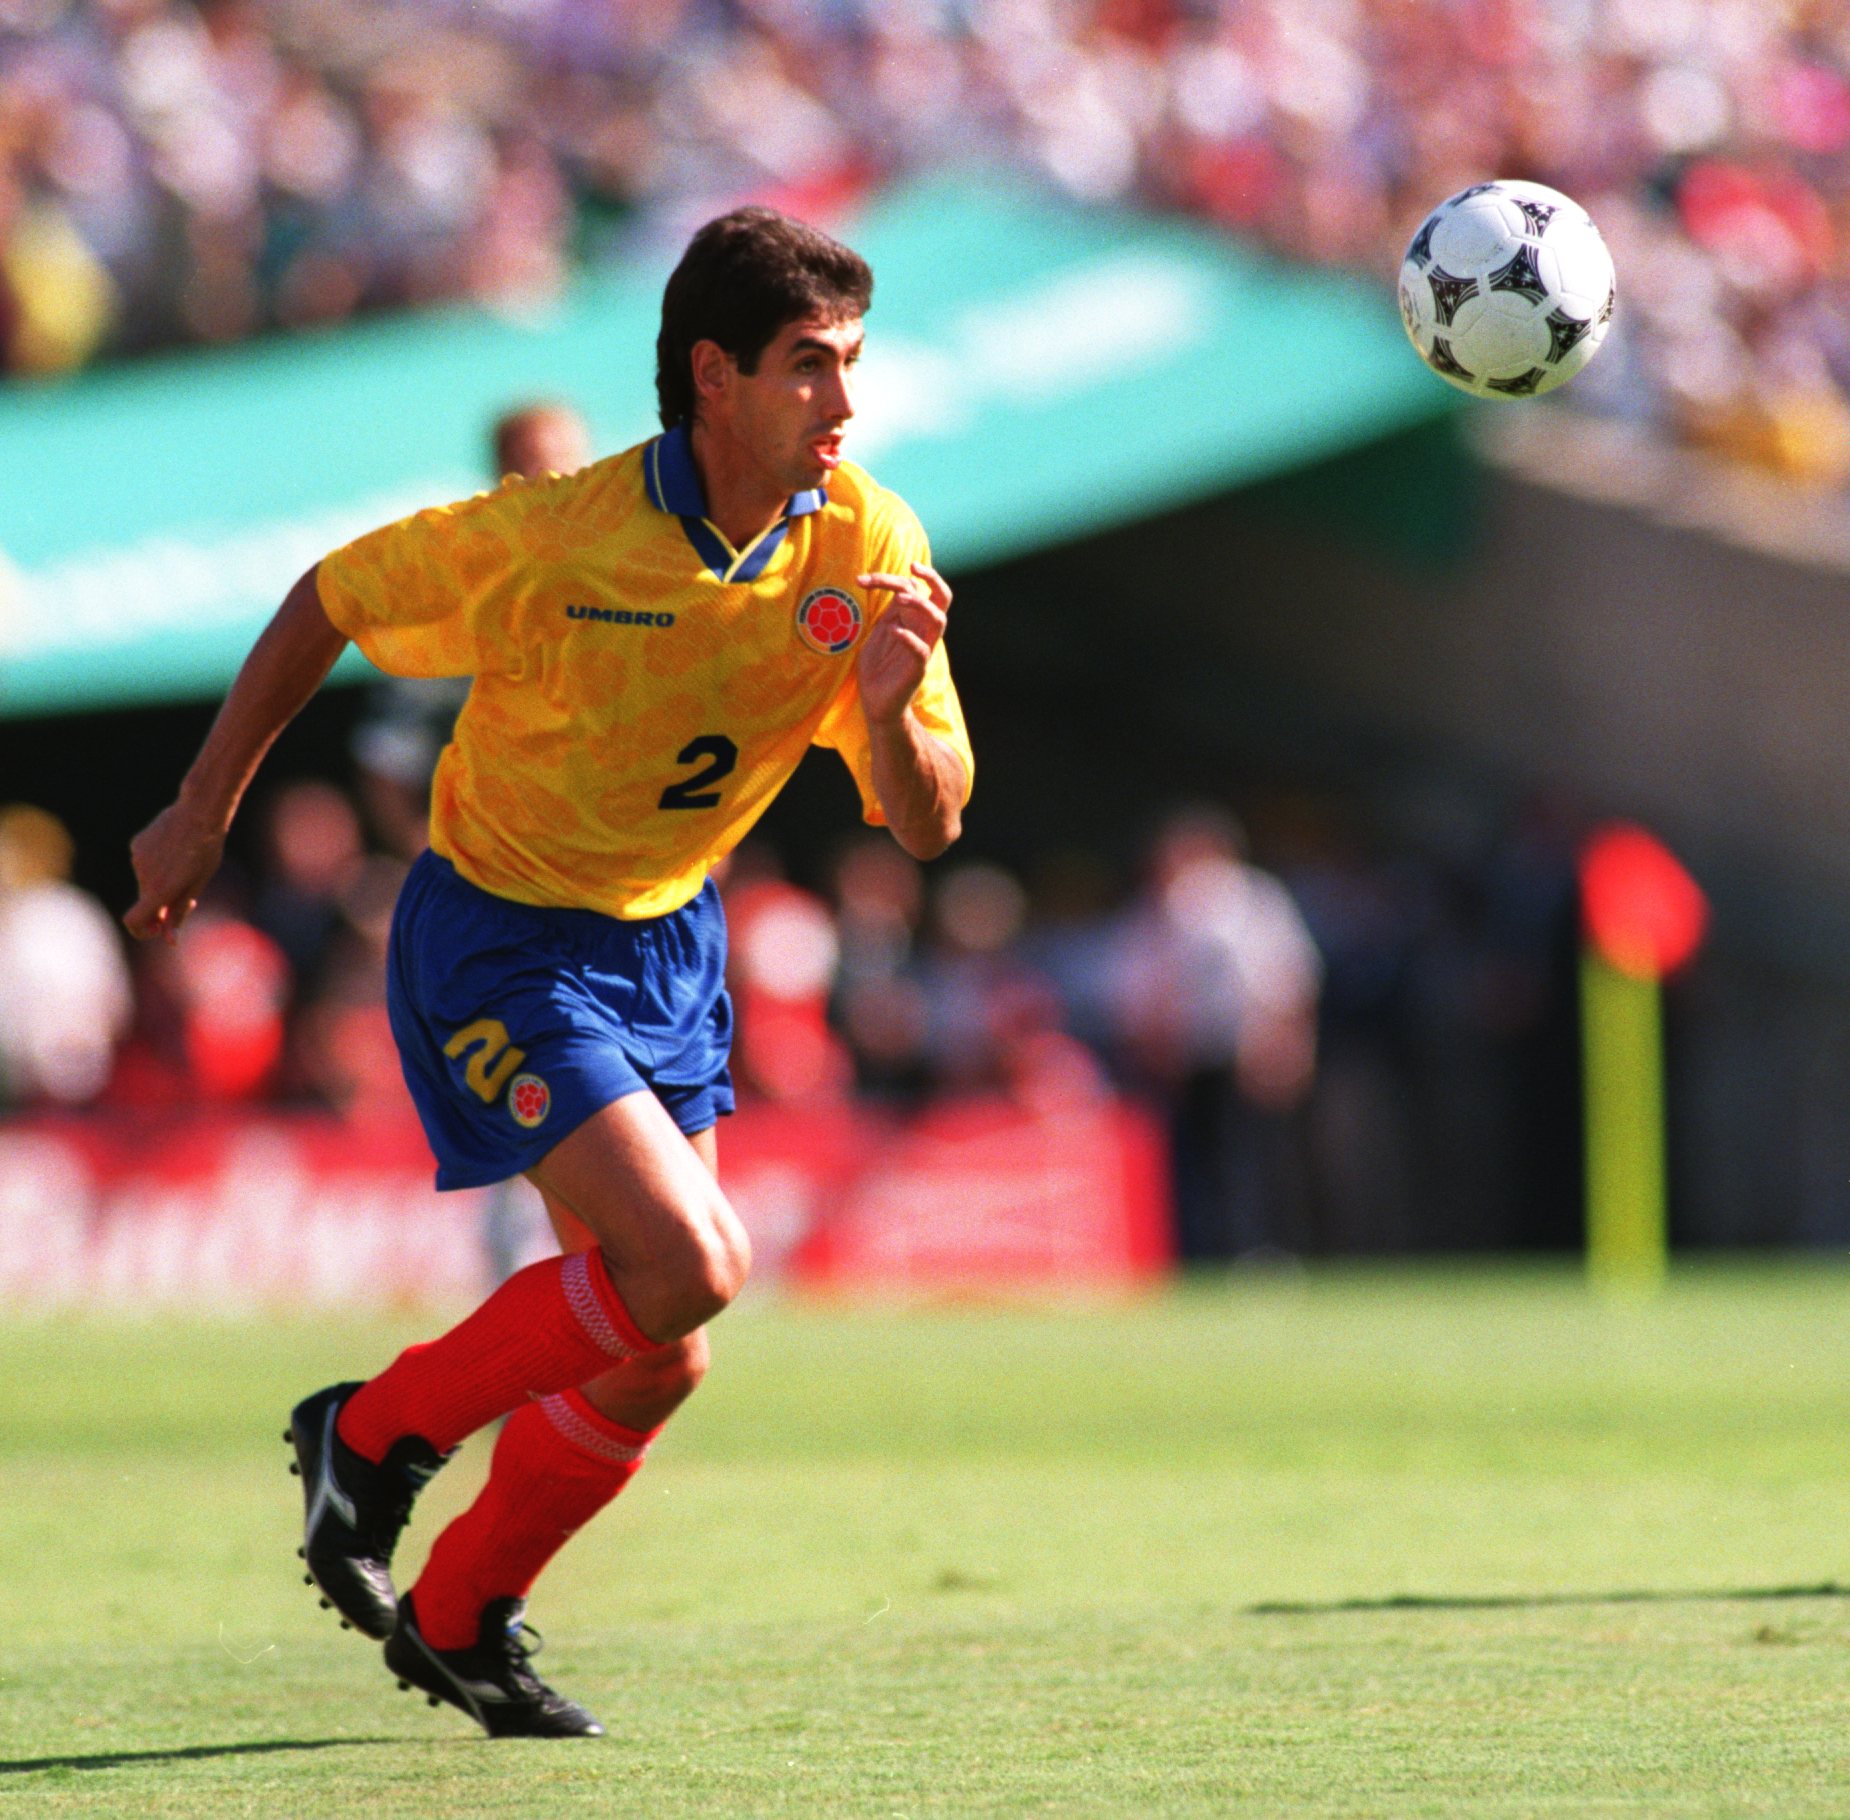 22 JUN 1994:  ANDRES ESCOBAR OF COLOMBIA TRIES TO CONTROL THE BALL DURING COLOMBIA's 2-1 LOSS TO THE USA IN A 1994 WORLD CUP MATCH AT THE ROSE BOWL IN PASADENA. Mandatory Credit: Shaun Botterill/ALLSPORT